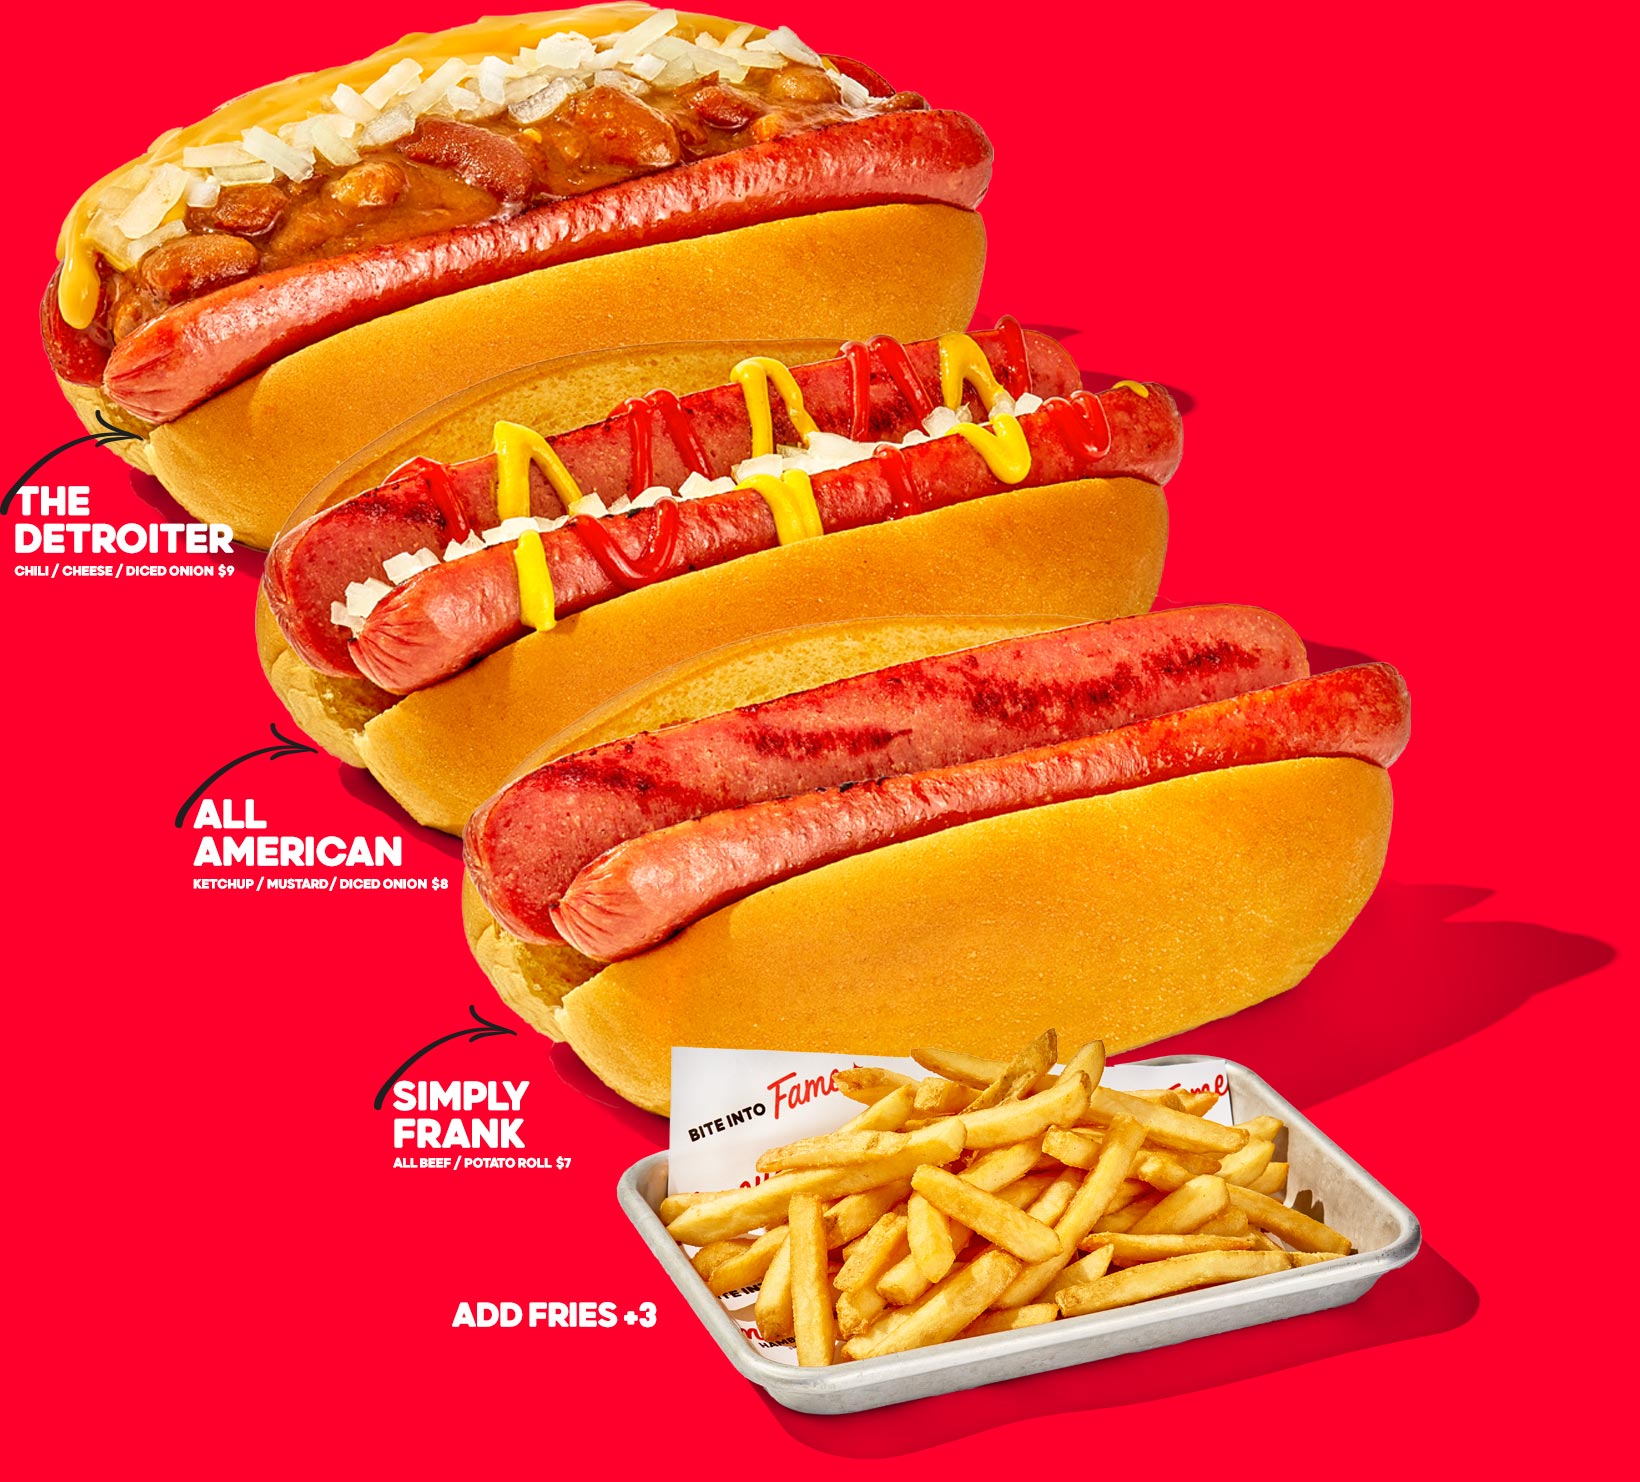 Famous Hot Dogs Now Available!